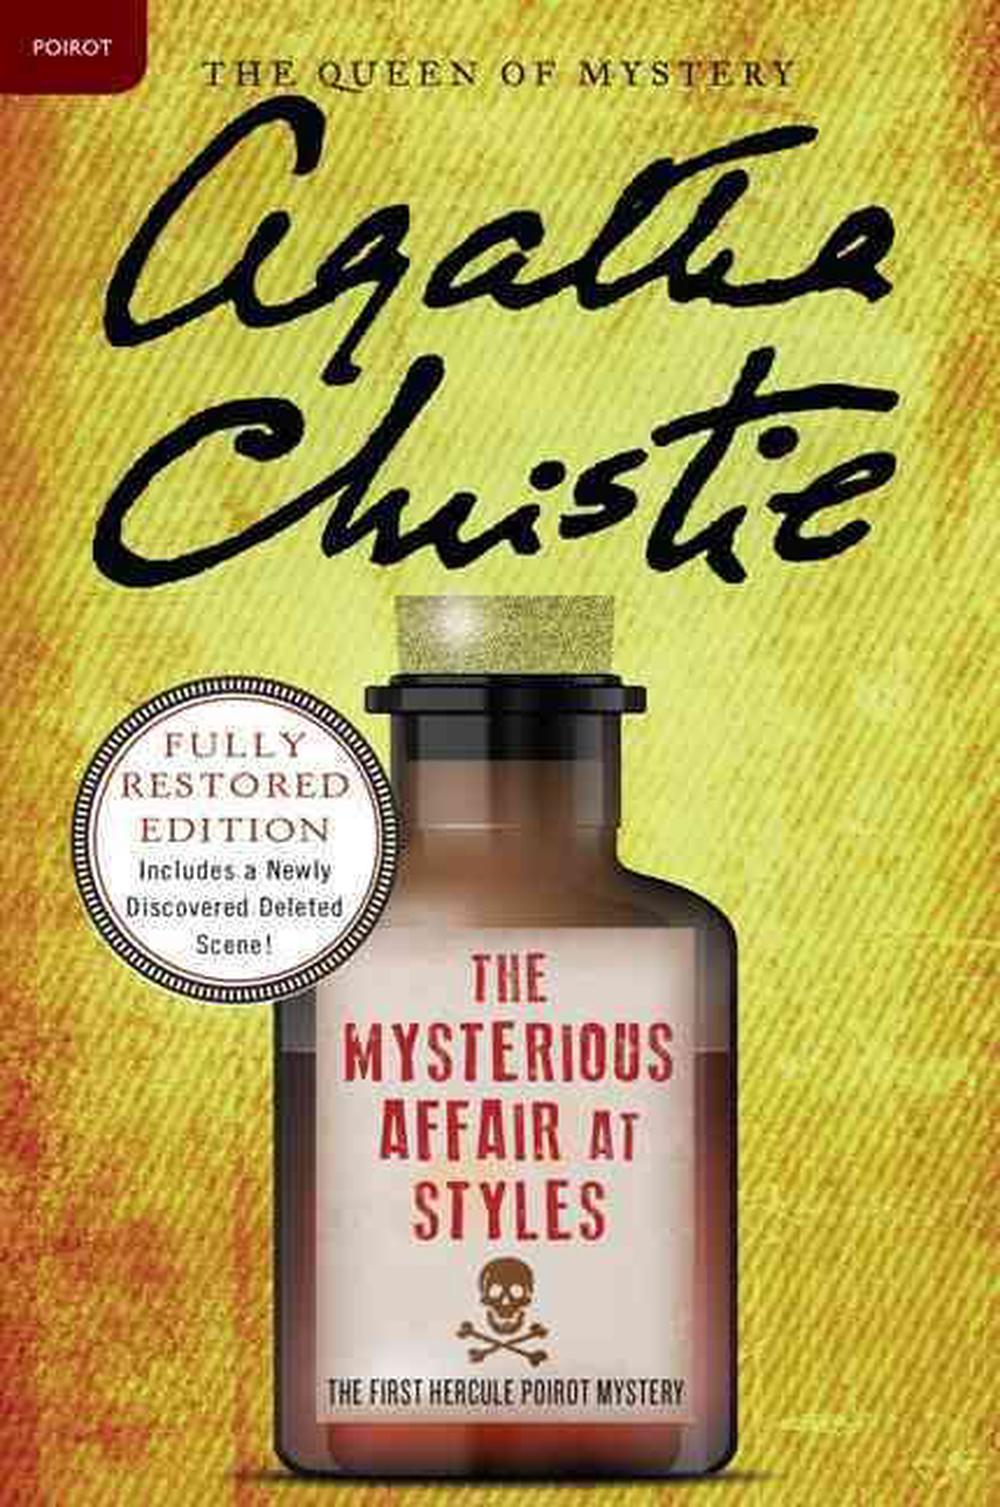 book review the mysterious affair at styles